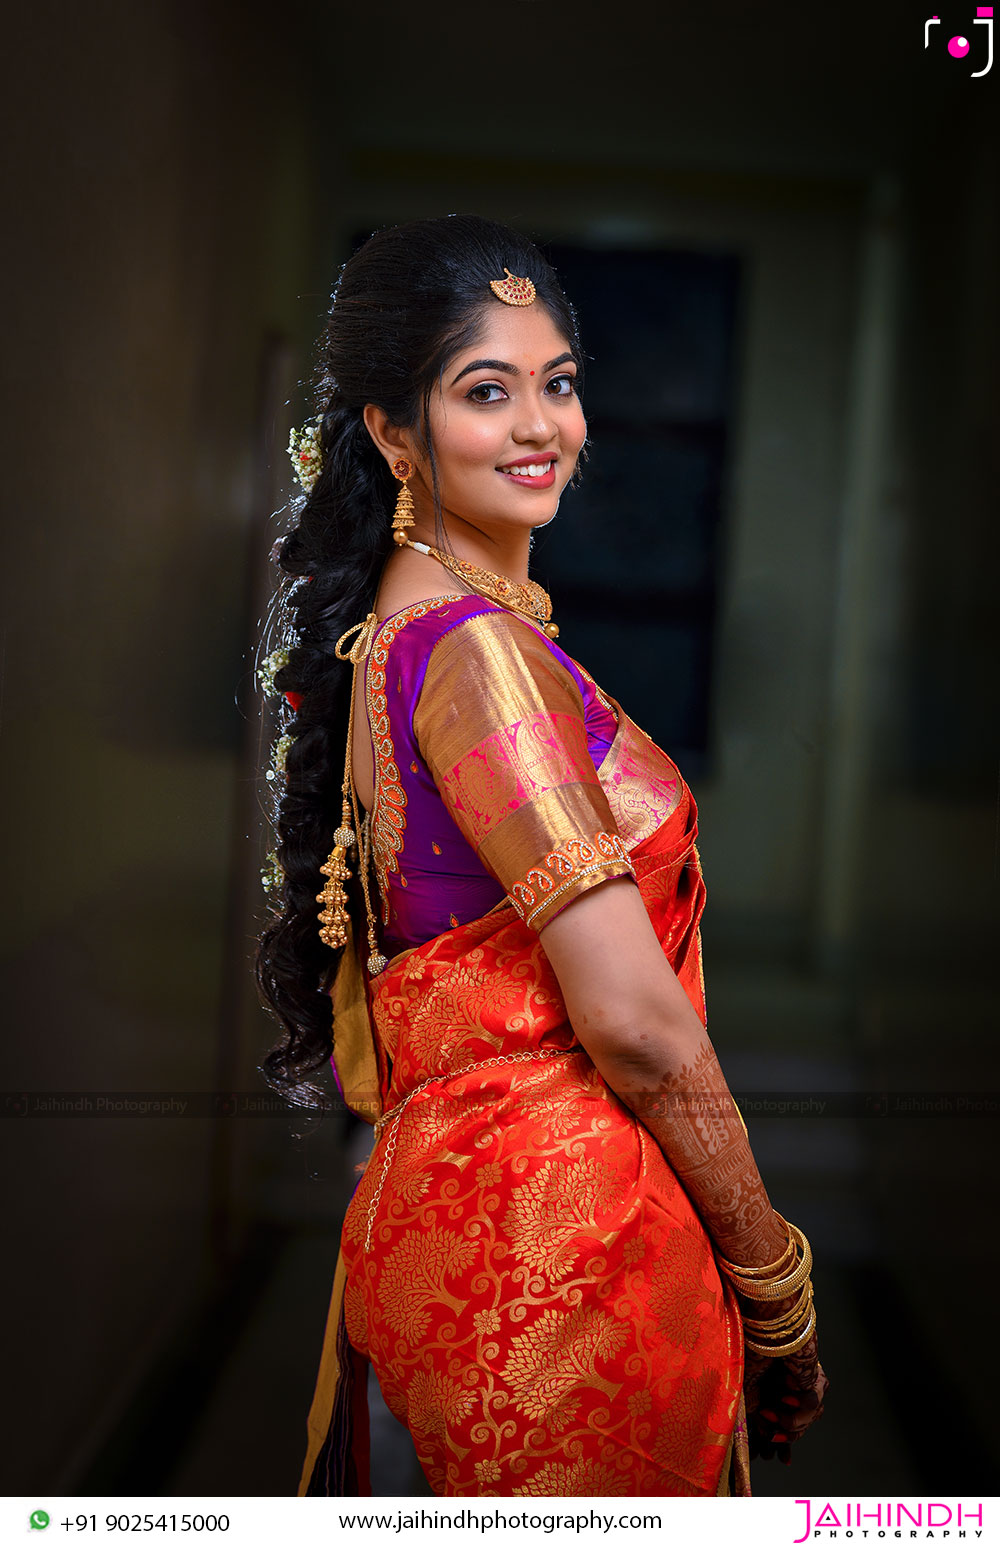 Wedding Photography Packages In Madurai, Best Wedding Photographers In ...